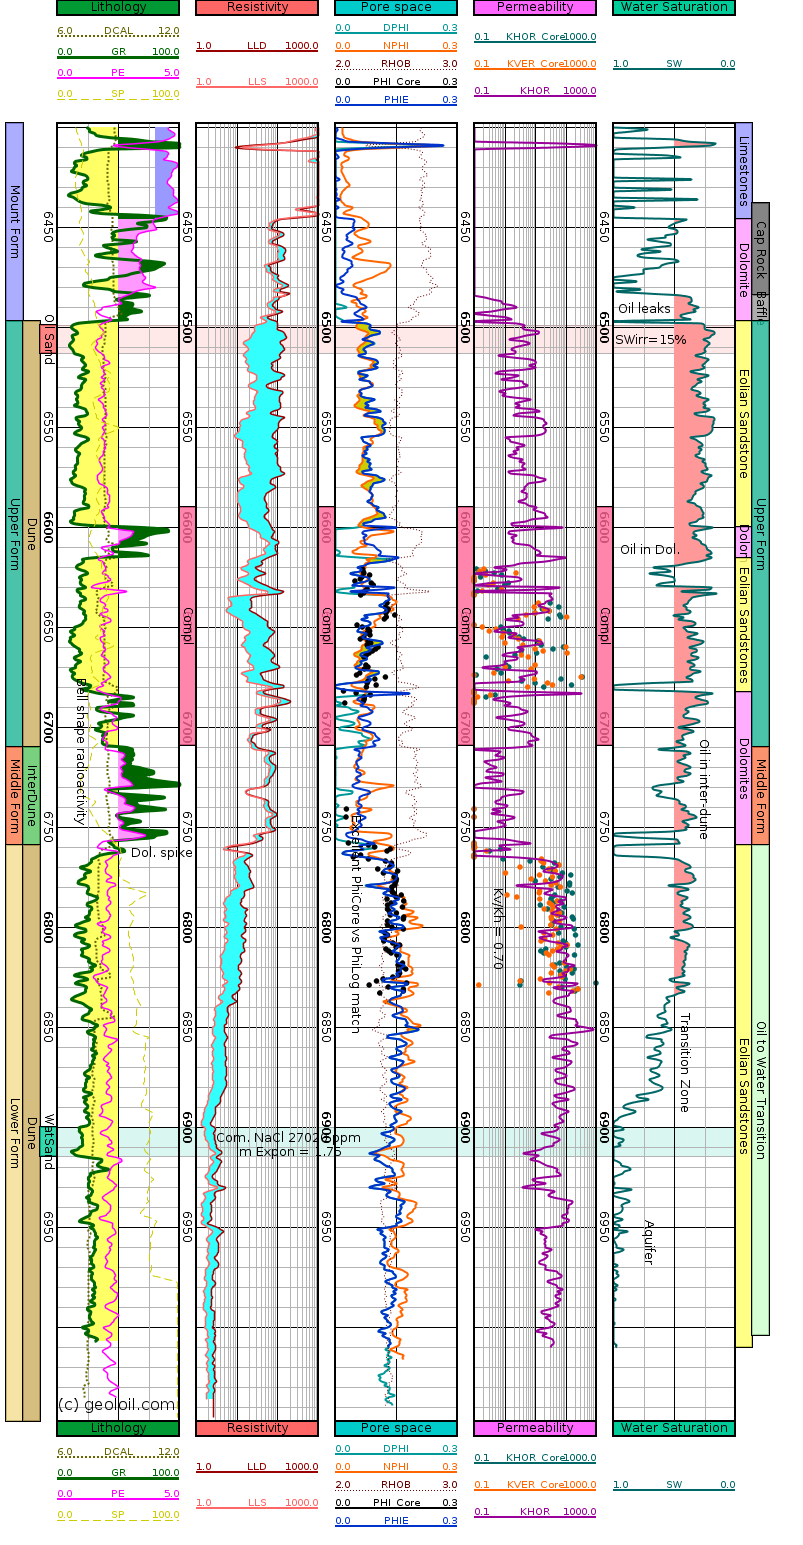 GeolOil LAS file plot showing imported core porosity and permeabilities